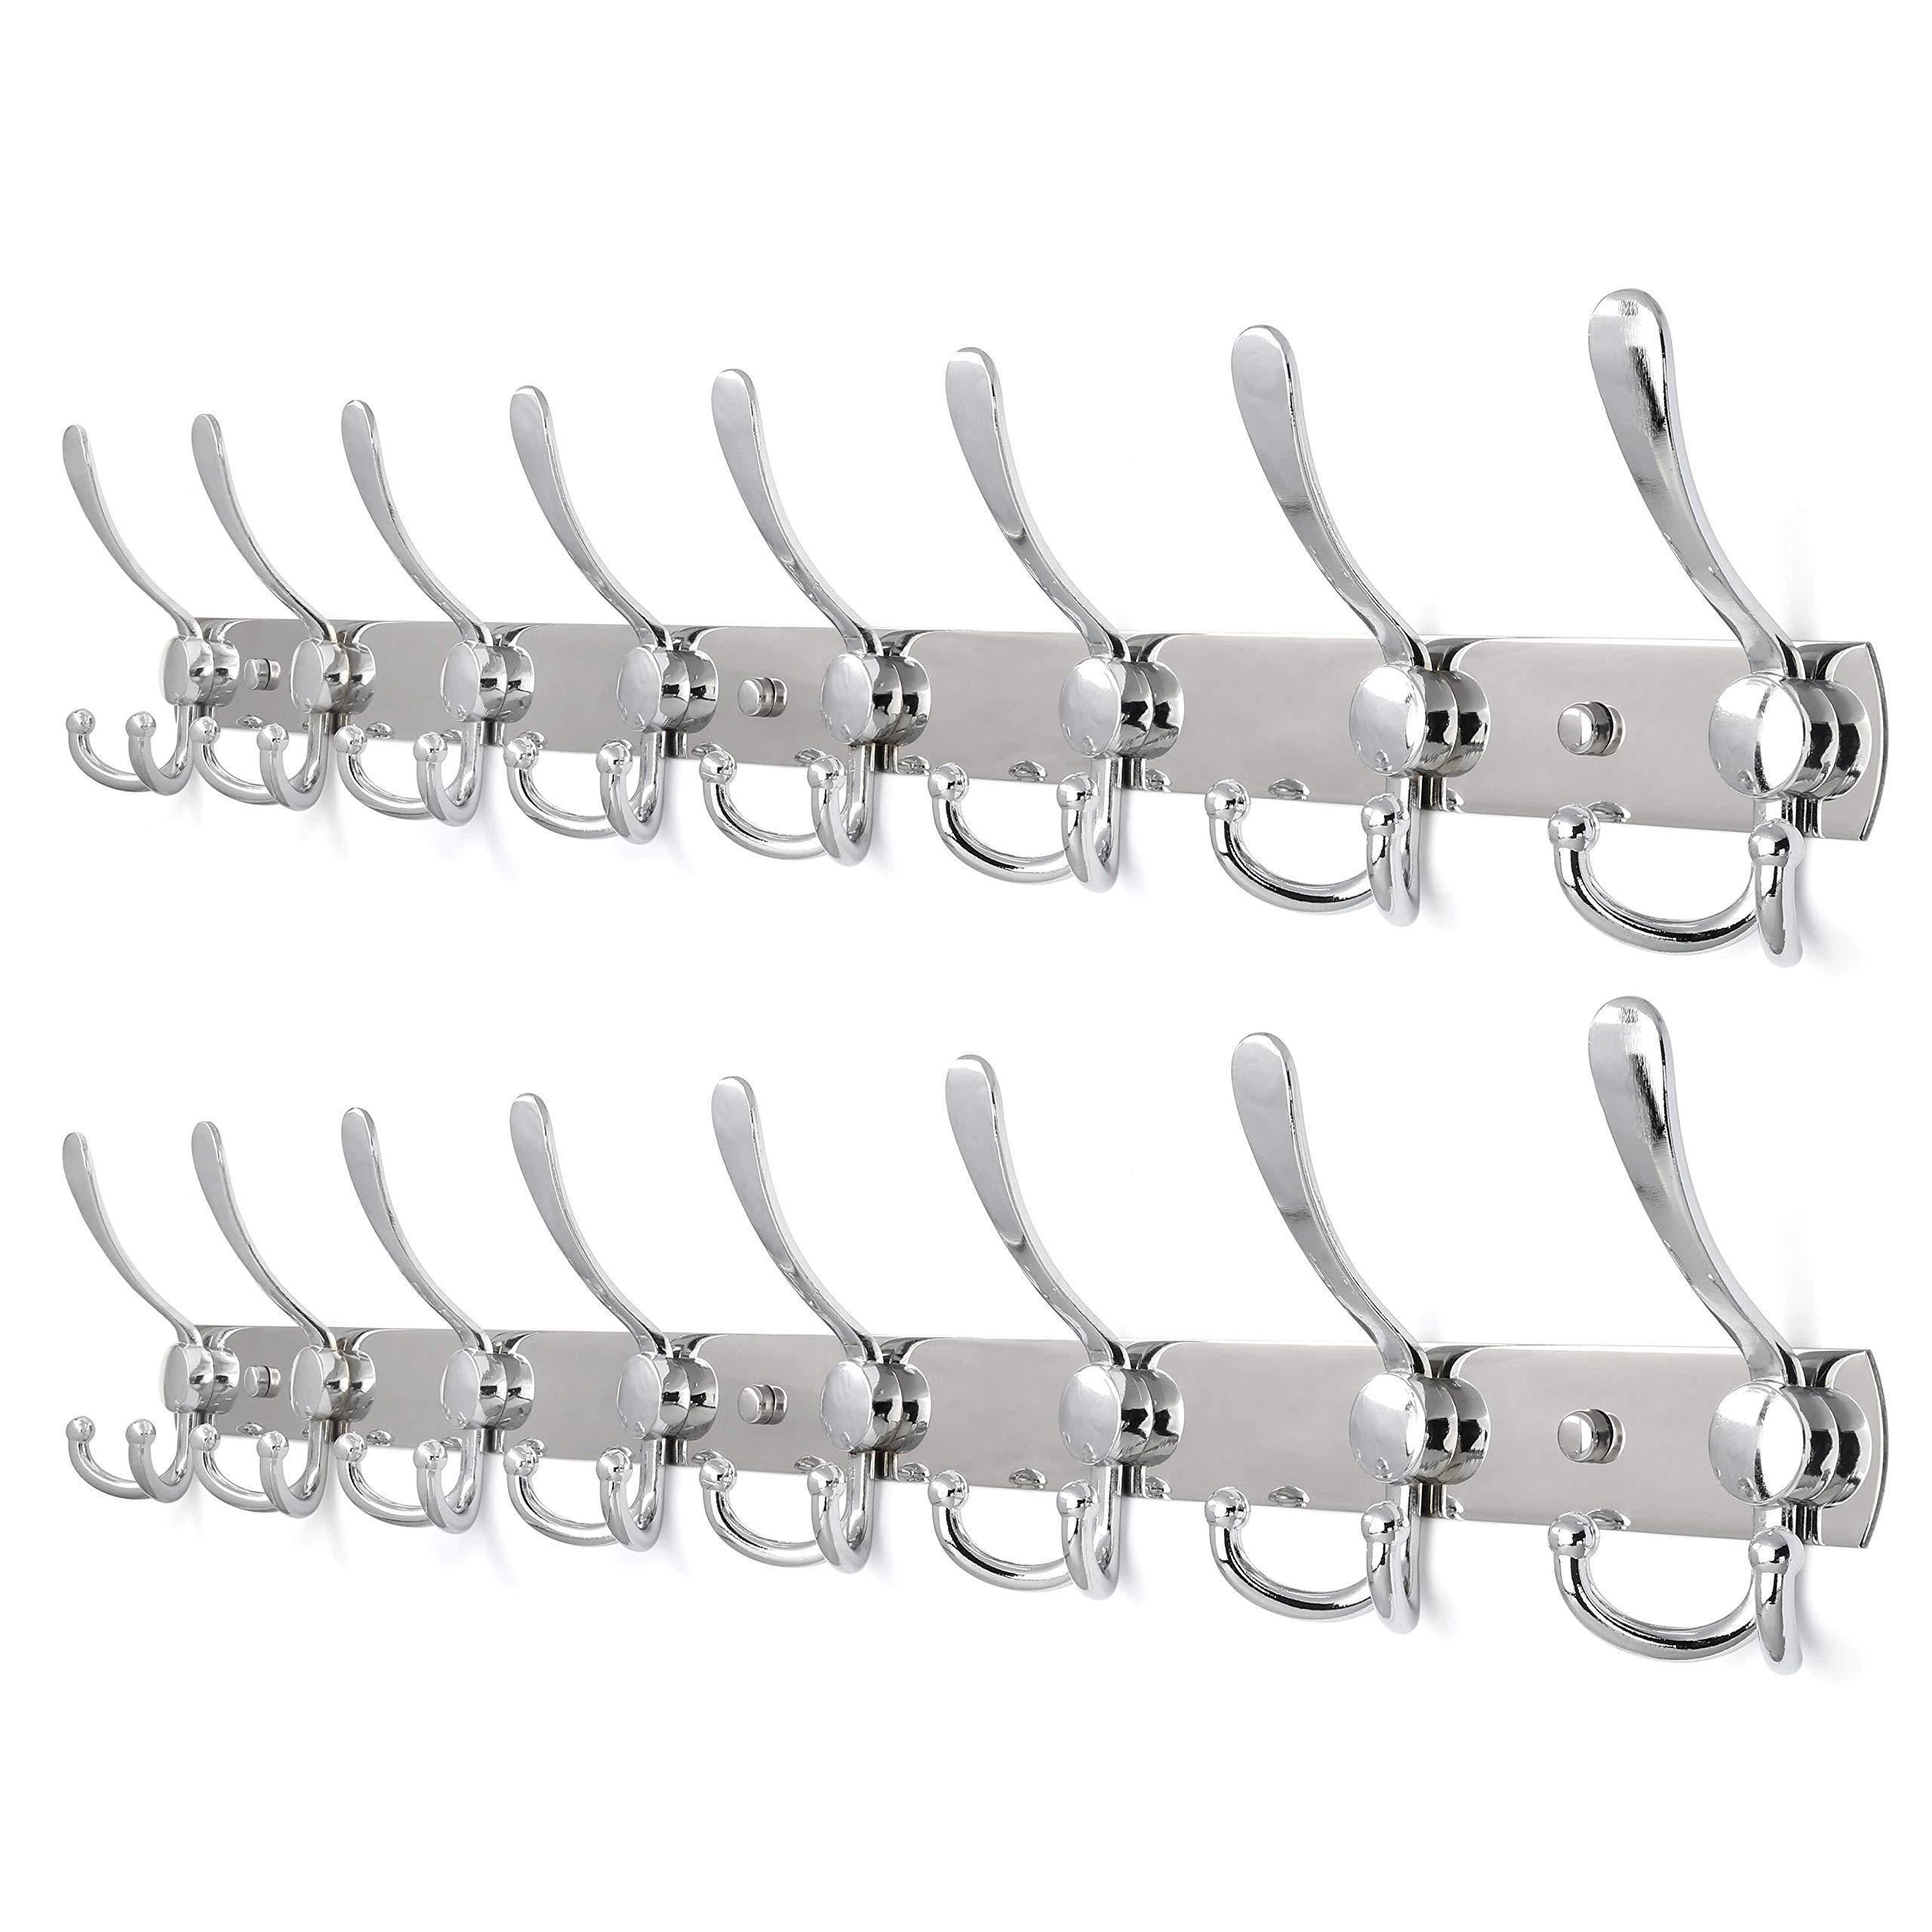 2pacs, WEBI 30-Inch Entryway Robe Hat Clothes Towel Rack Rail/Coat Rack with 8 Flared Tri Hooks, Wall Mounted, Aluminum/Chrome Finish